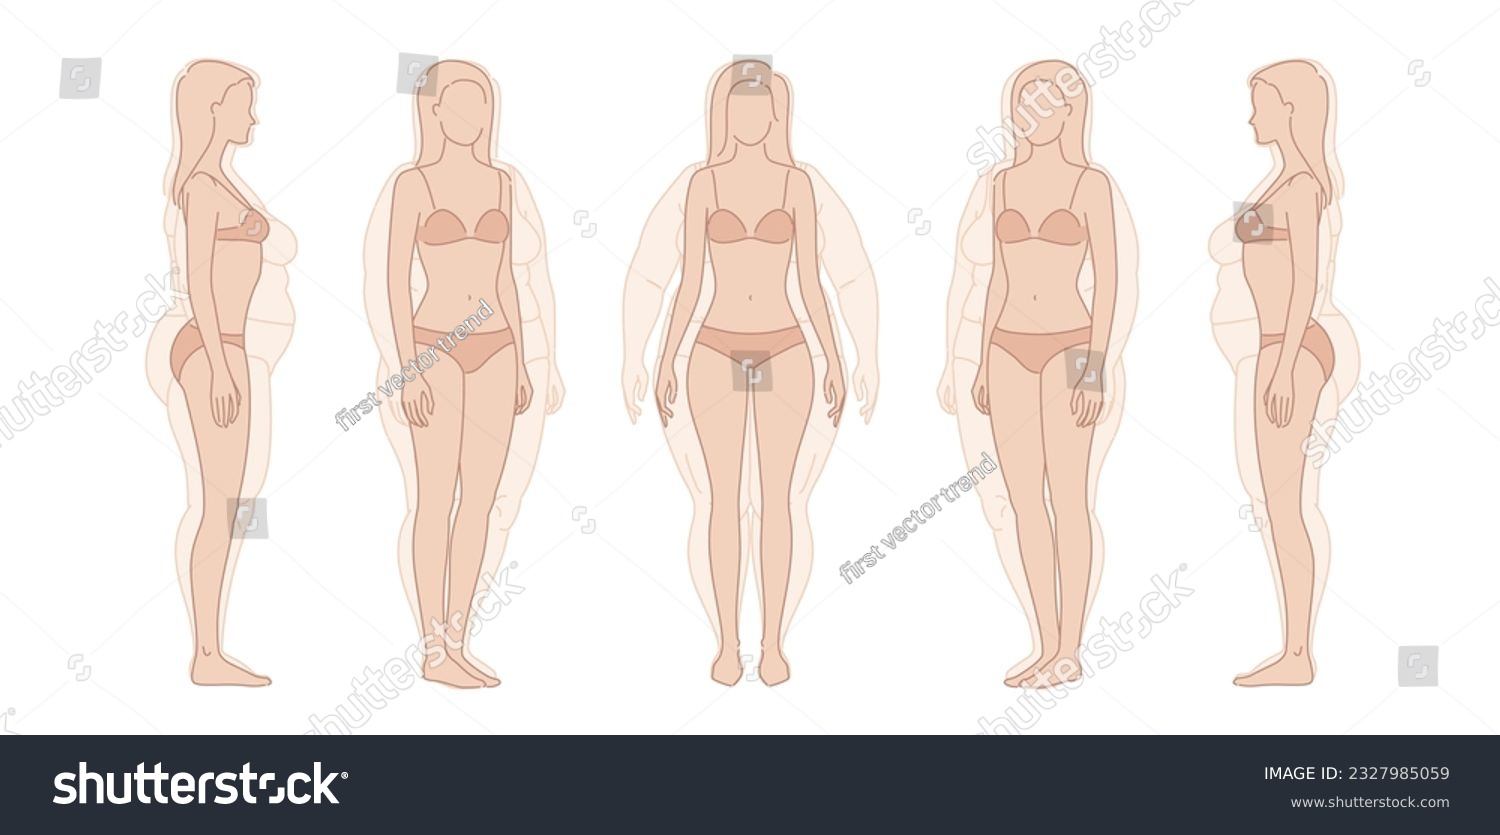 SVG of Woman weight loss before and after diet. Body Transformation challenge logo Concept. Overweight obese female silhouette. health shape. Five angles figure front, 3 of 4, side views Vector illustration svg